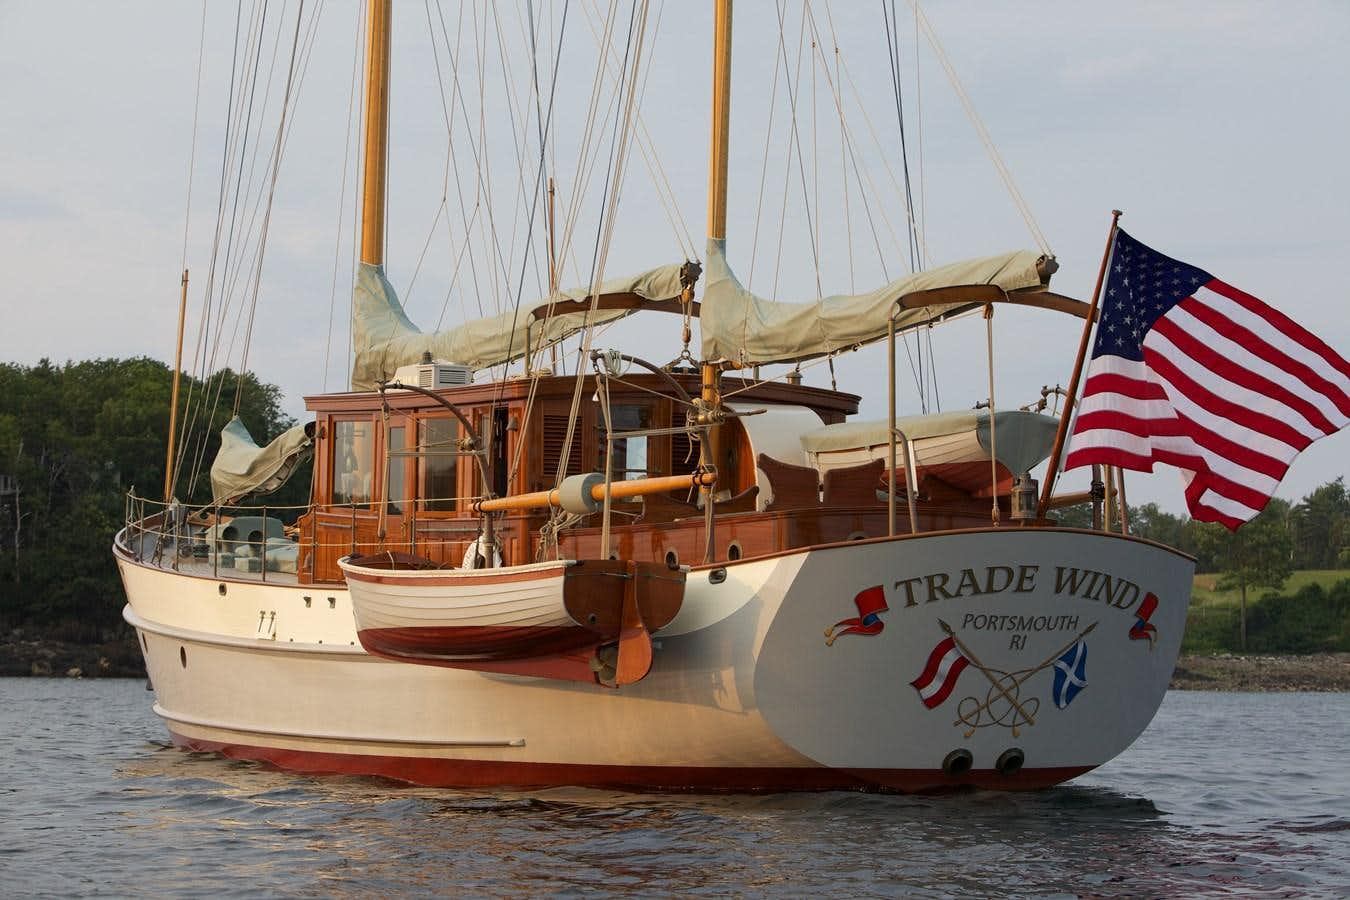 Trade wind
Yacht for Sale